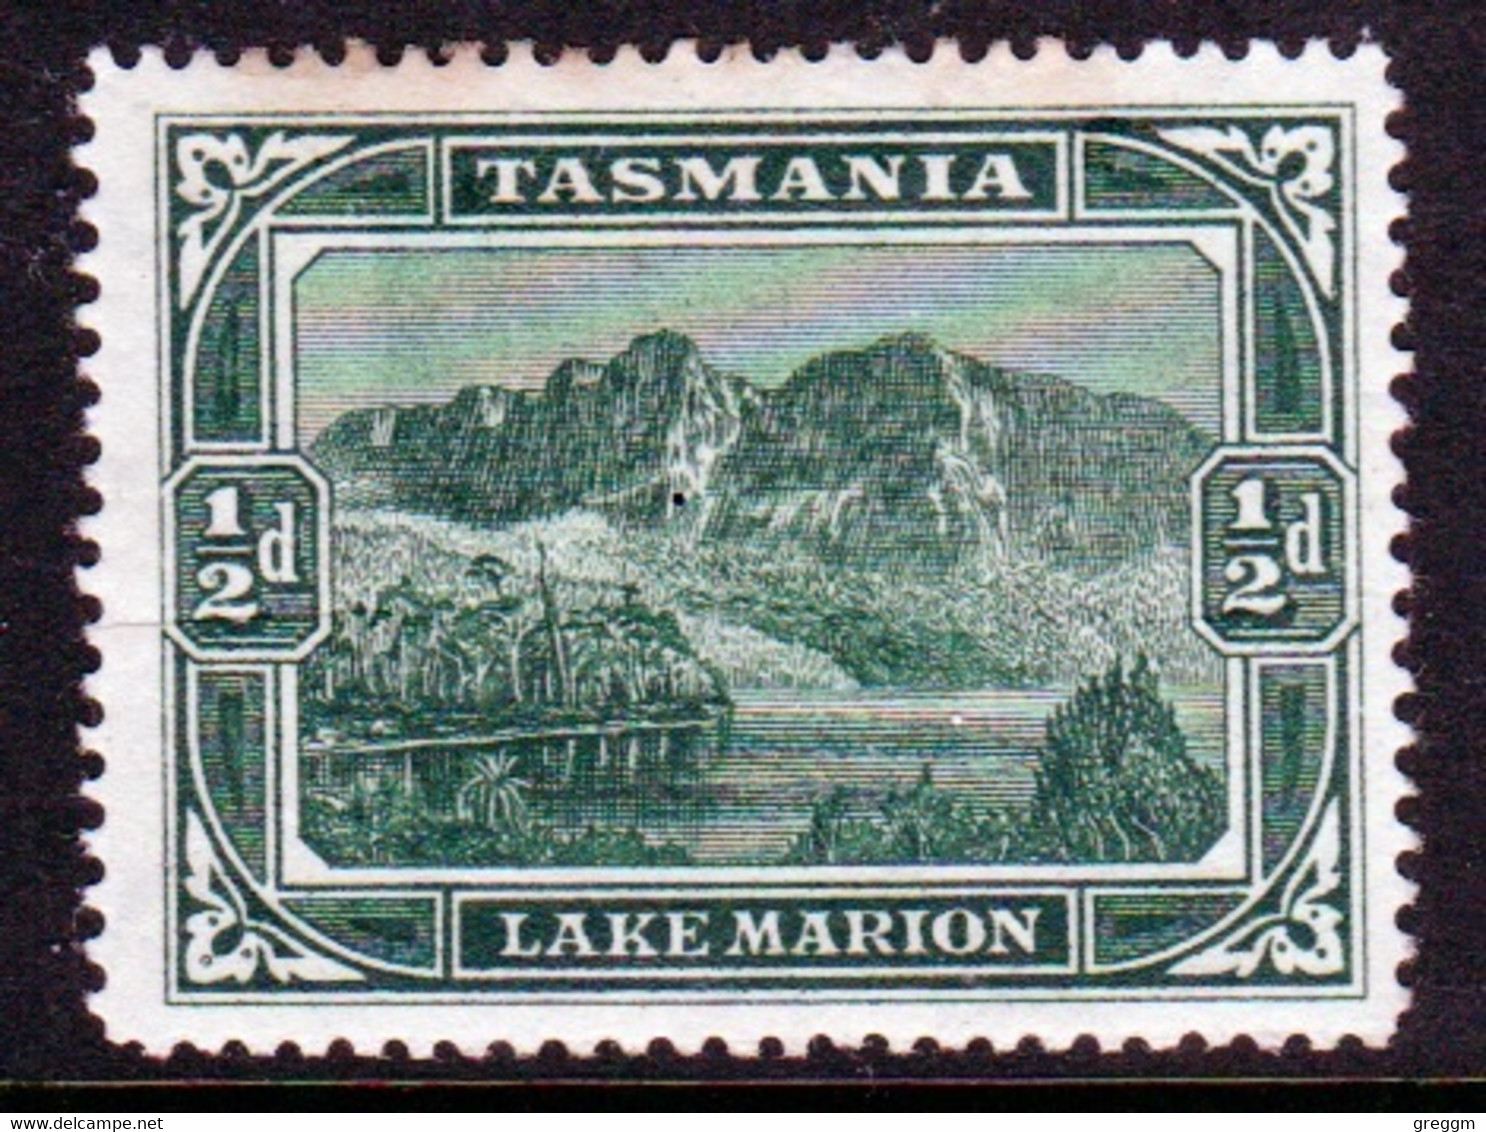 Tasmania 1899 Single  ½d Stamp In Mounted Mint With Slight Toning On Top Edge.. - Neufs